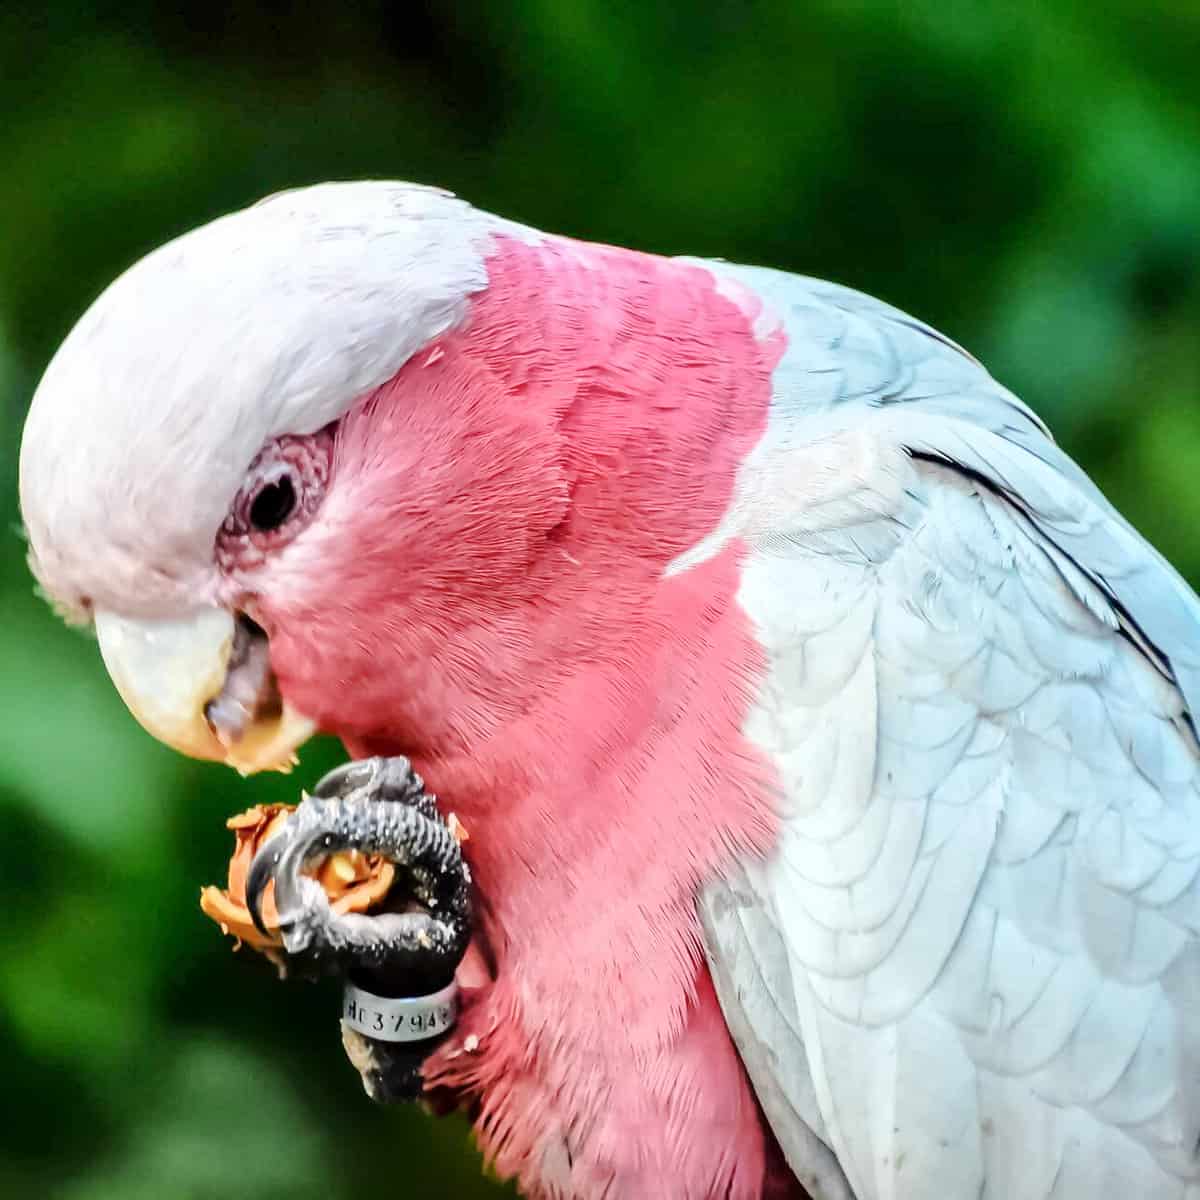 What Are the Basic Needs of a Pet Bird?